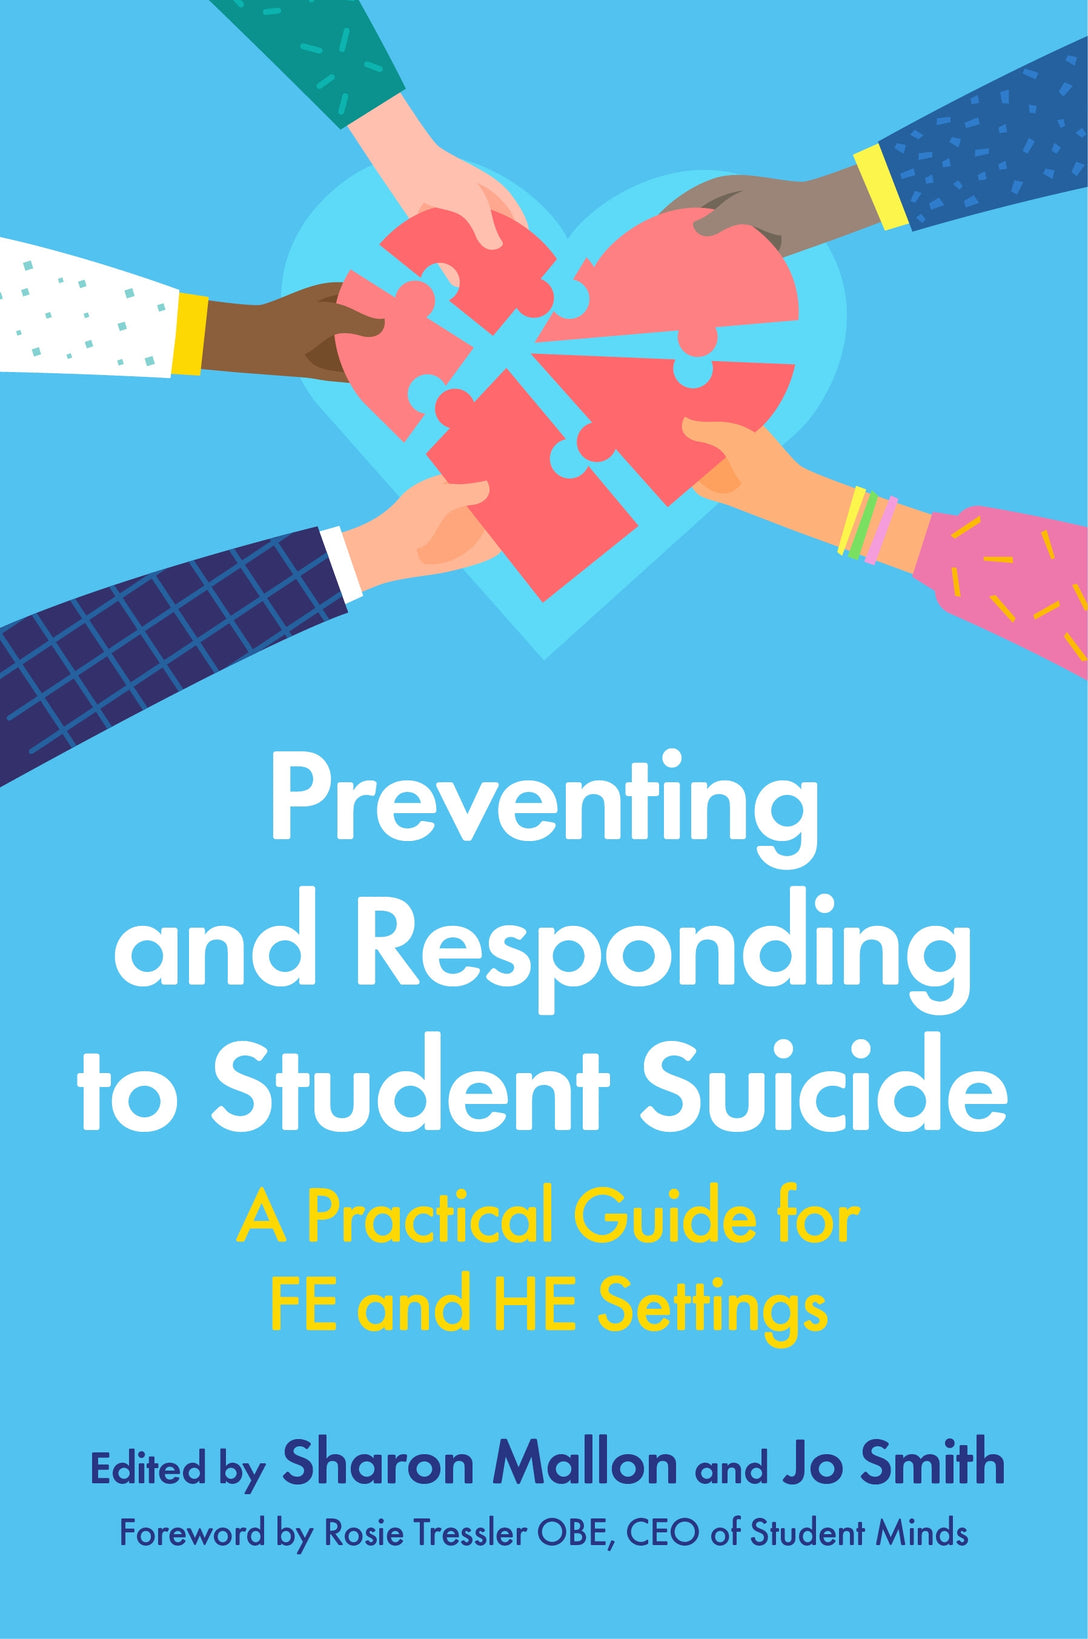 Preventing and Responding to Student Suicide by Sharon Mallon, Jo Smith, Rosie Tressler OBE, Various Authors